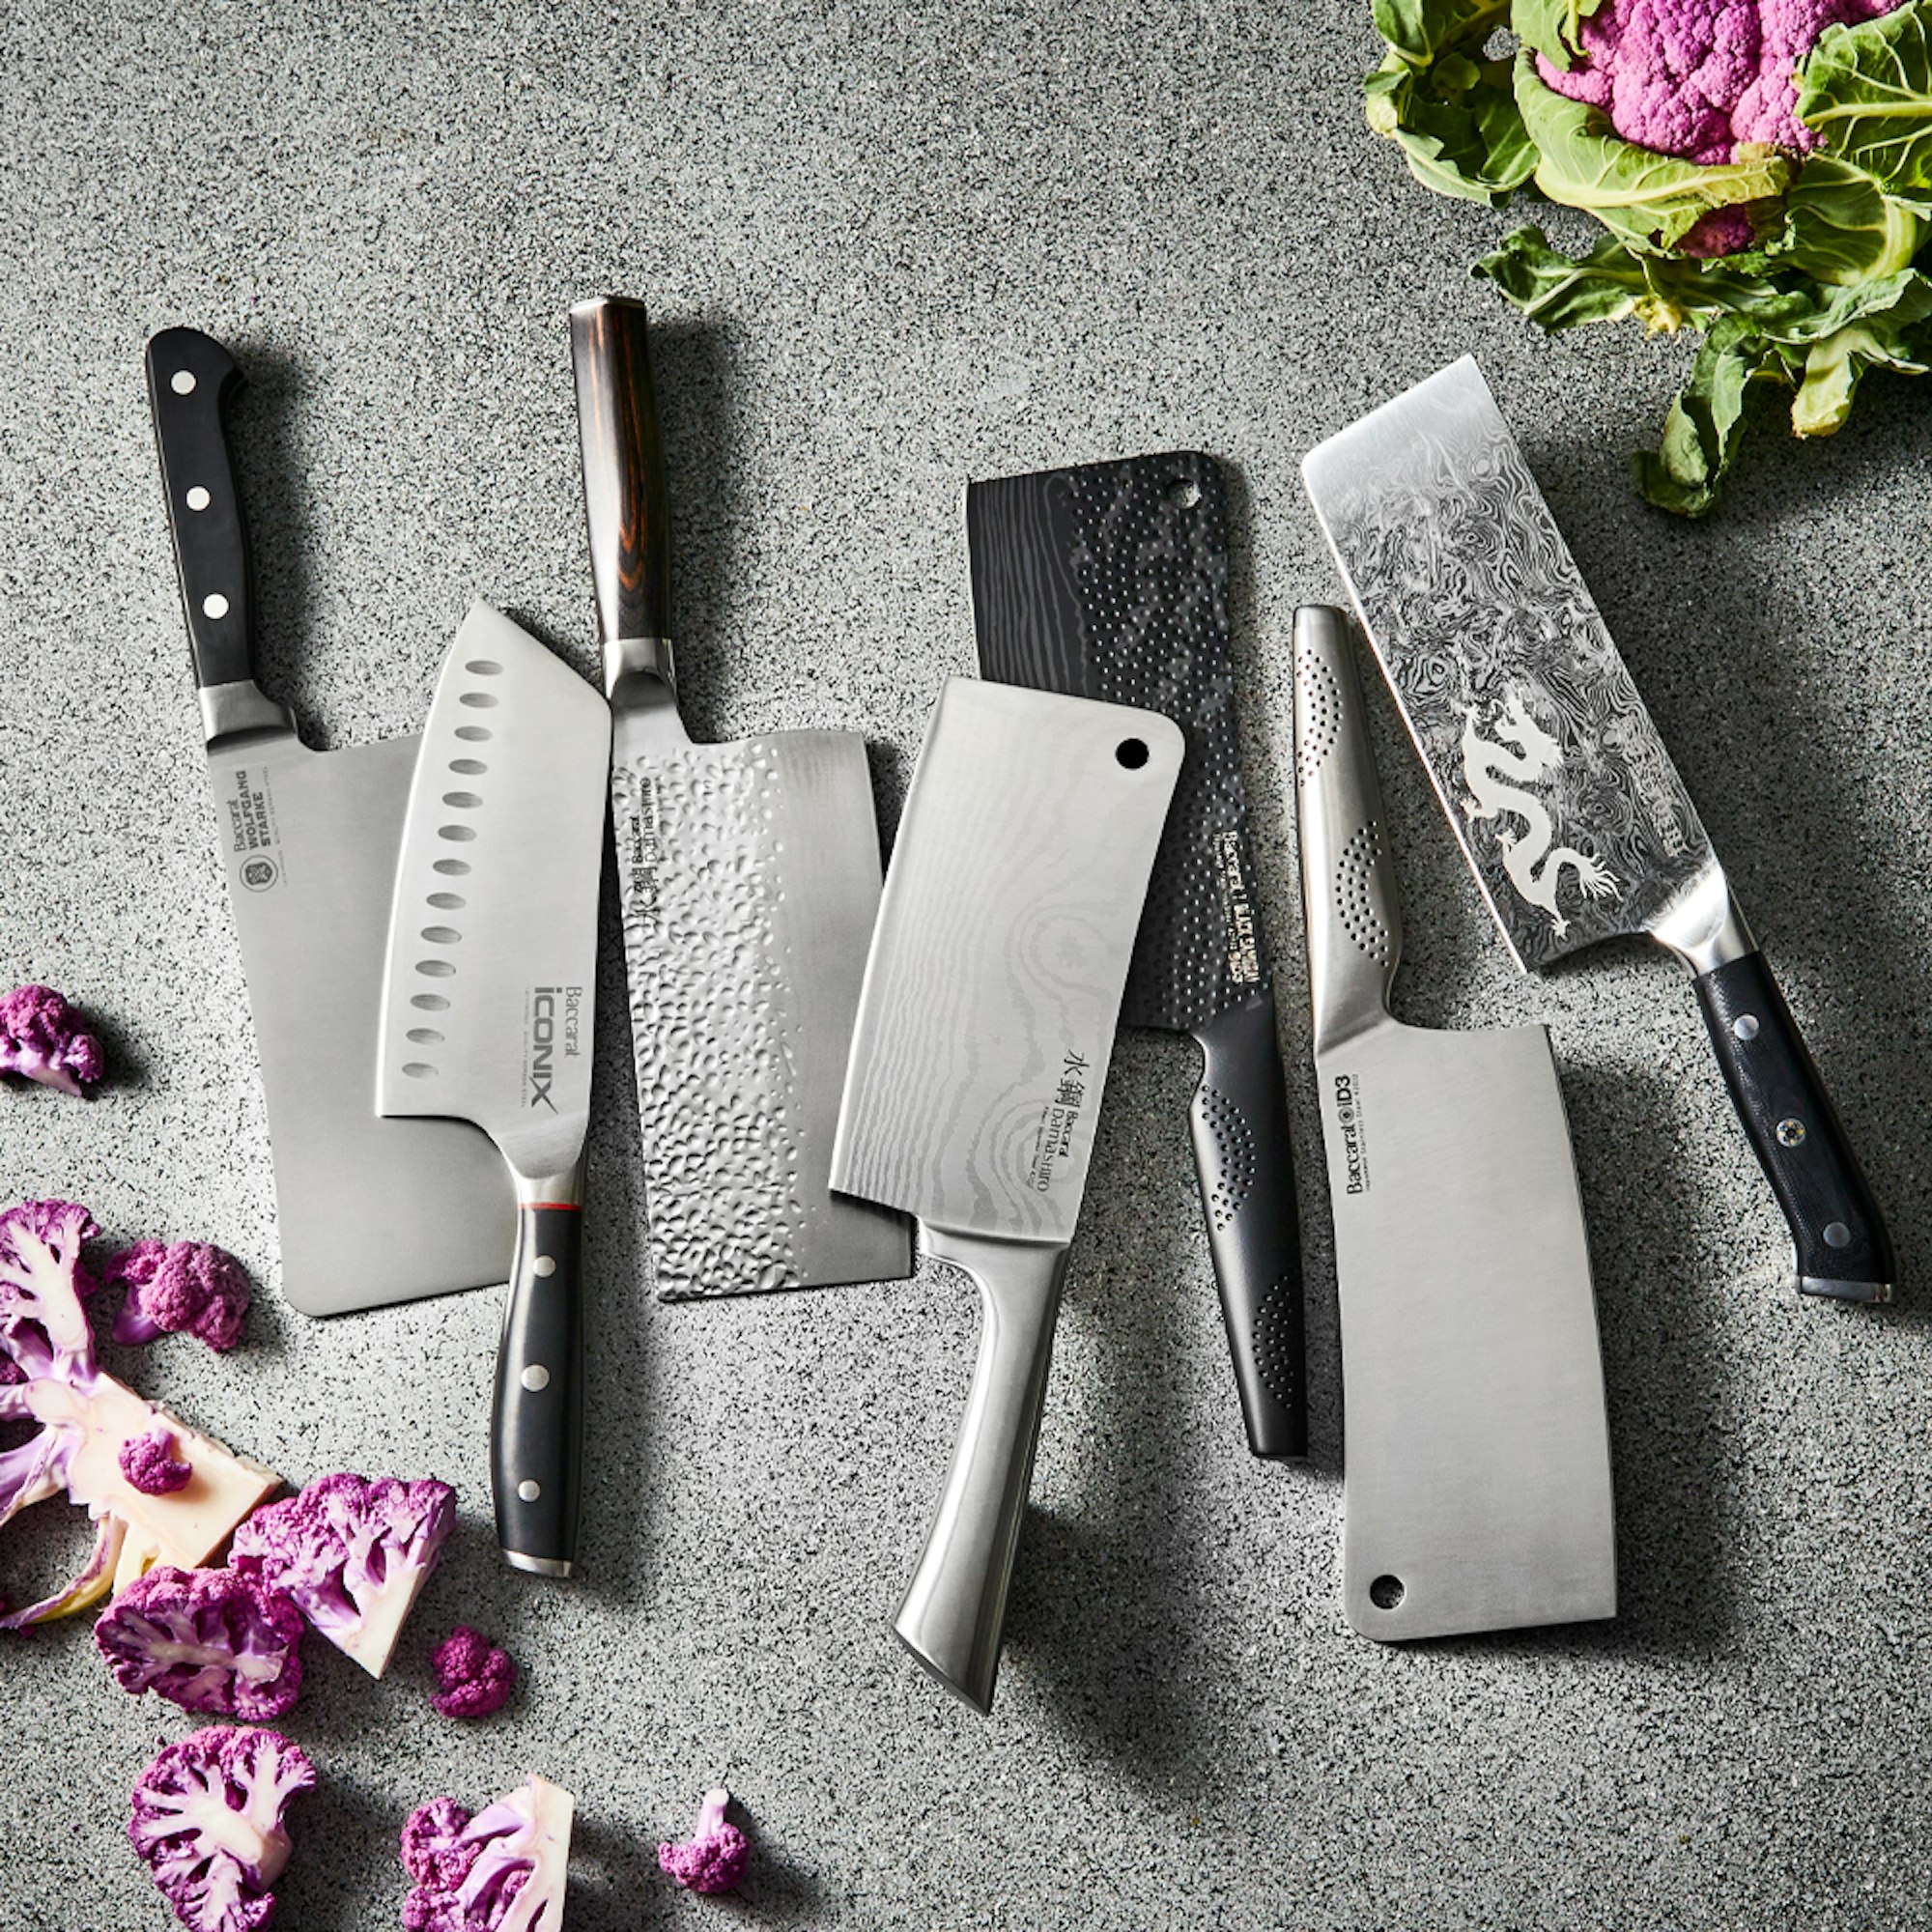 How To Dispose of Old Knives - Kitchen Knife Disposal | House Blog